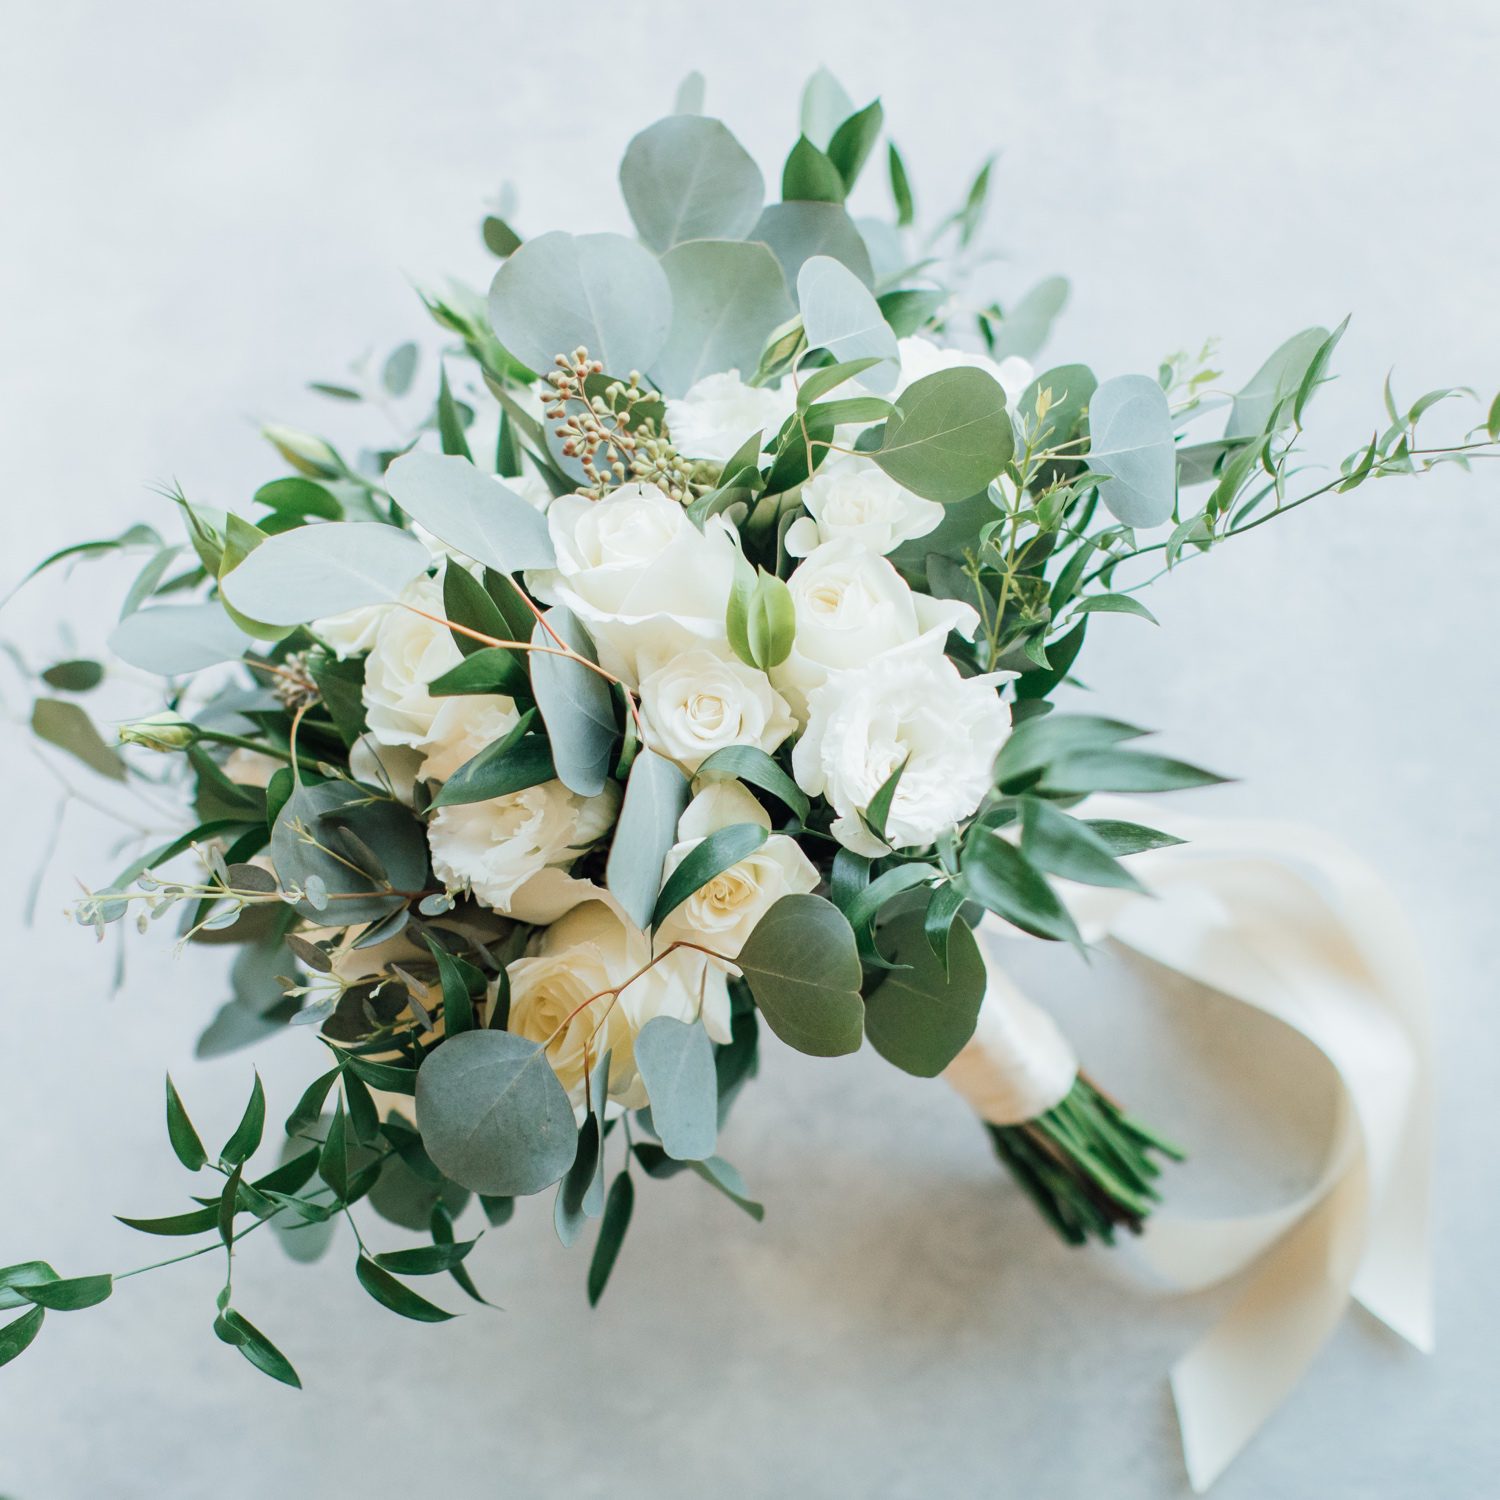 Wedding bouquet created with white roses and green foliage by Marshall Gardens for Tuscany inspired wedding at Aterno Estate in Paso Robles California by wine country photographer Jessica Sofranko